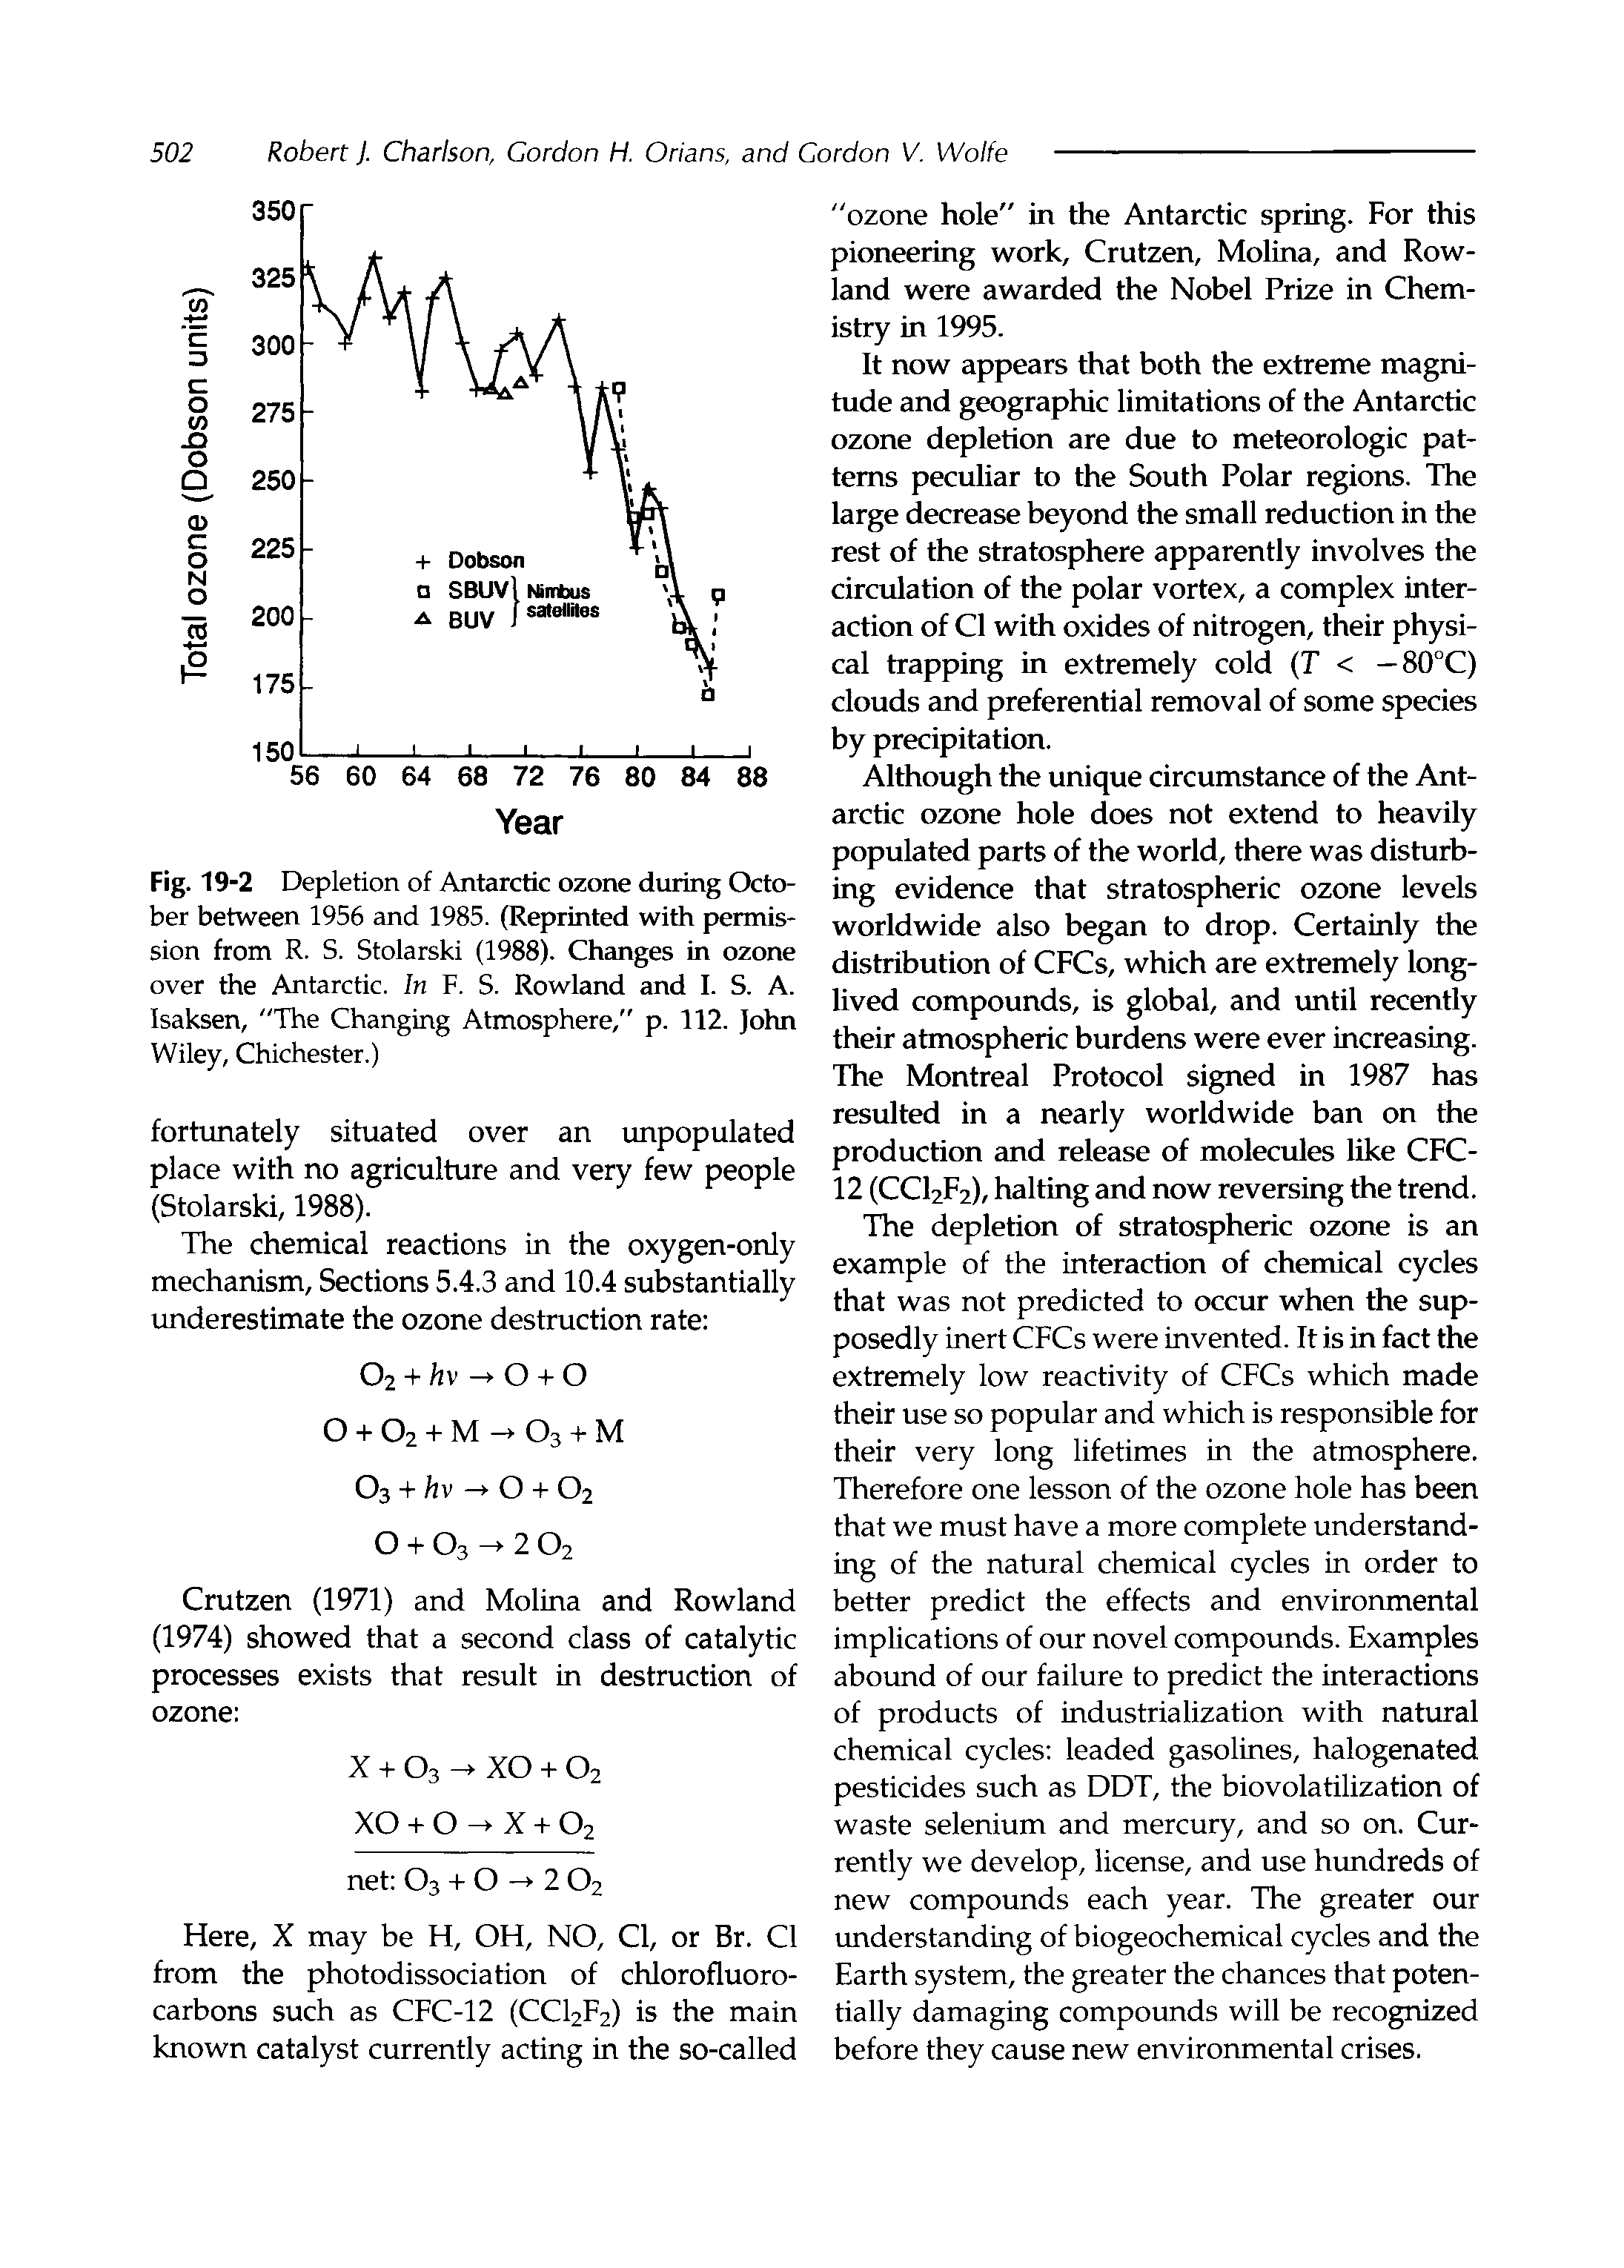 Fig. 19-2 Depletion of Antarctic ozone during October between 1956 and 1985. (Reprinted with permission from R. S. Stolarski (1988). Changes in ozone over the Antarctic. In F. S. Rowland and I. S. A. Isaksen, "The Changing Atmosphere/ p. 112. John Wiley, Chichester.)...